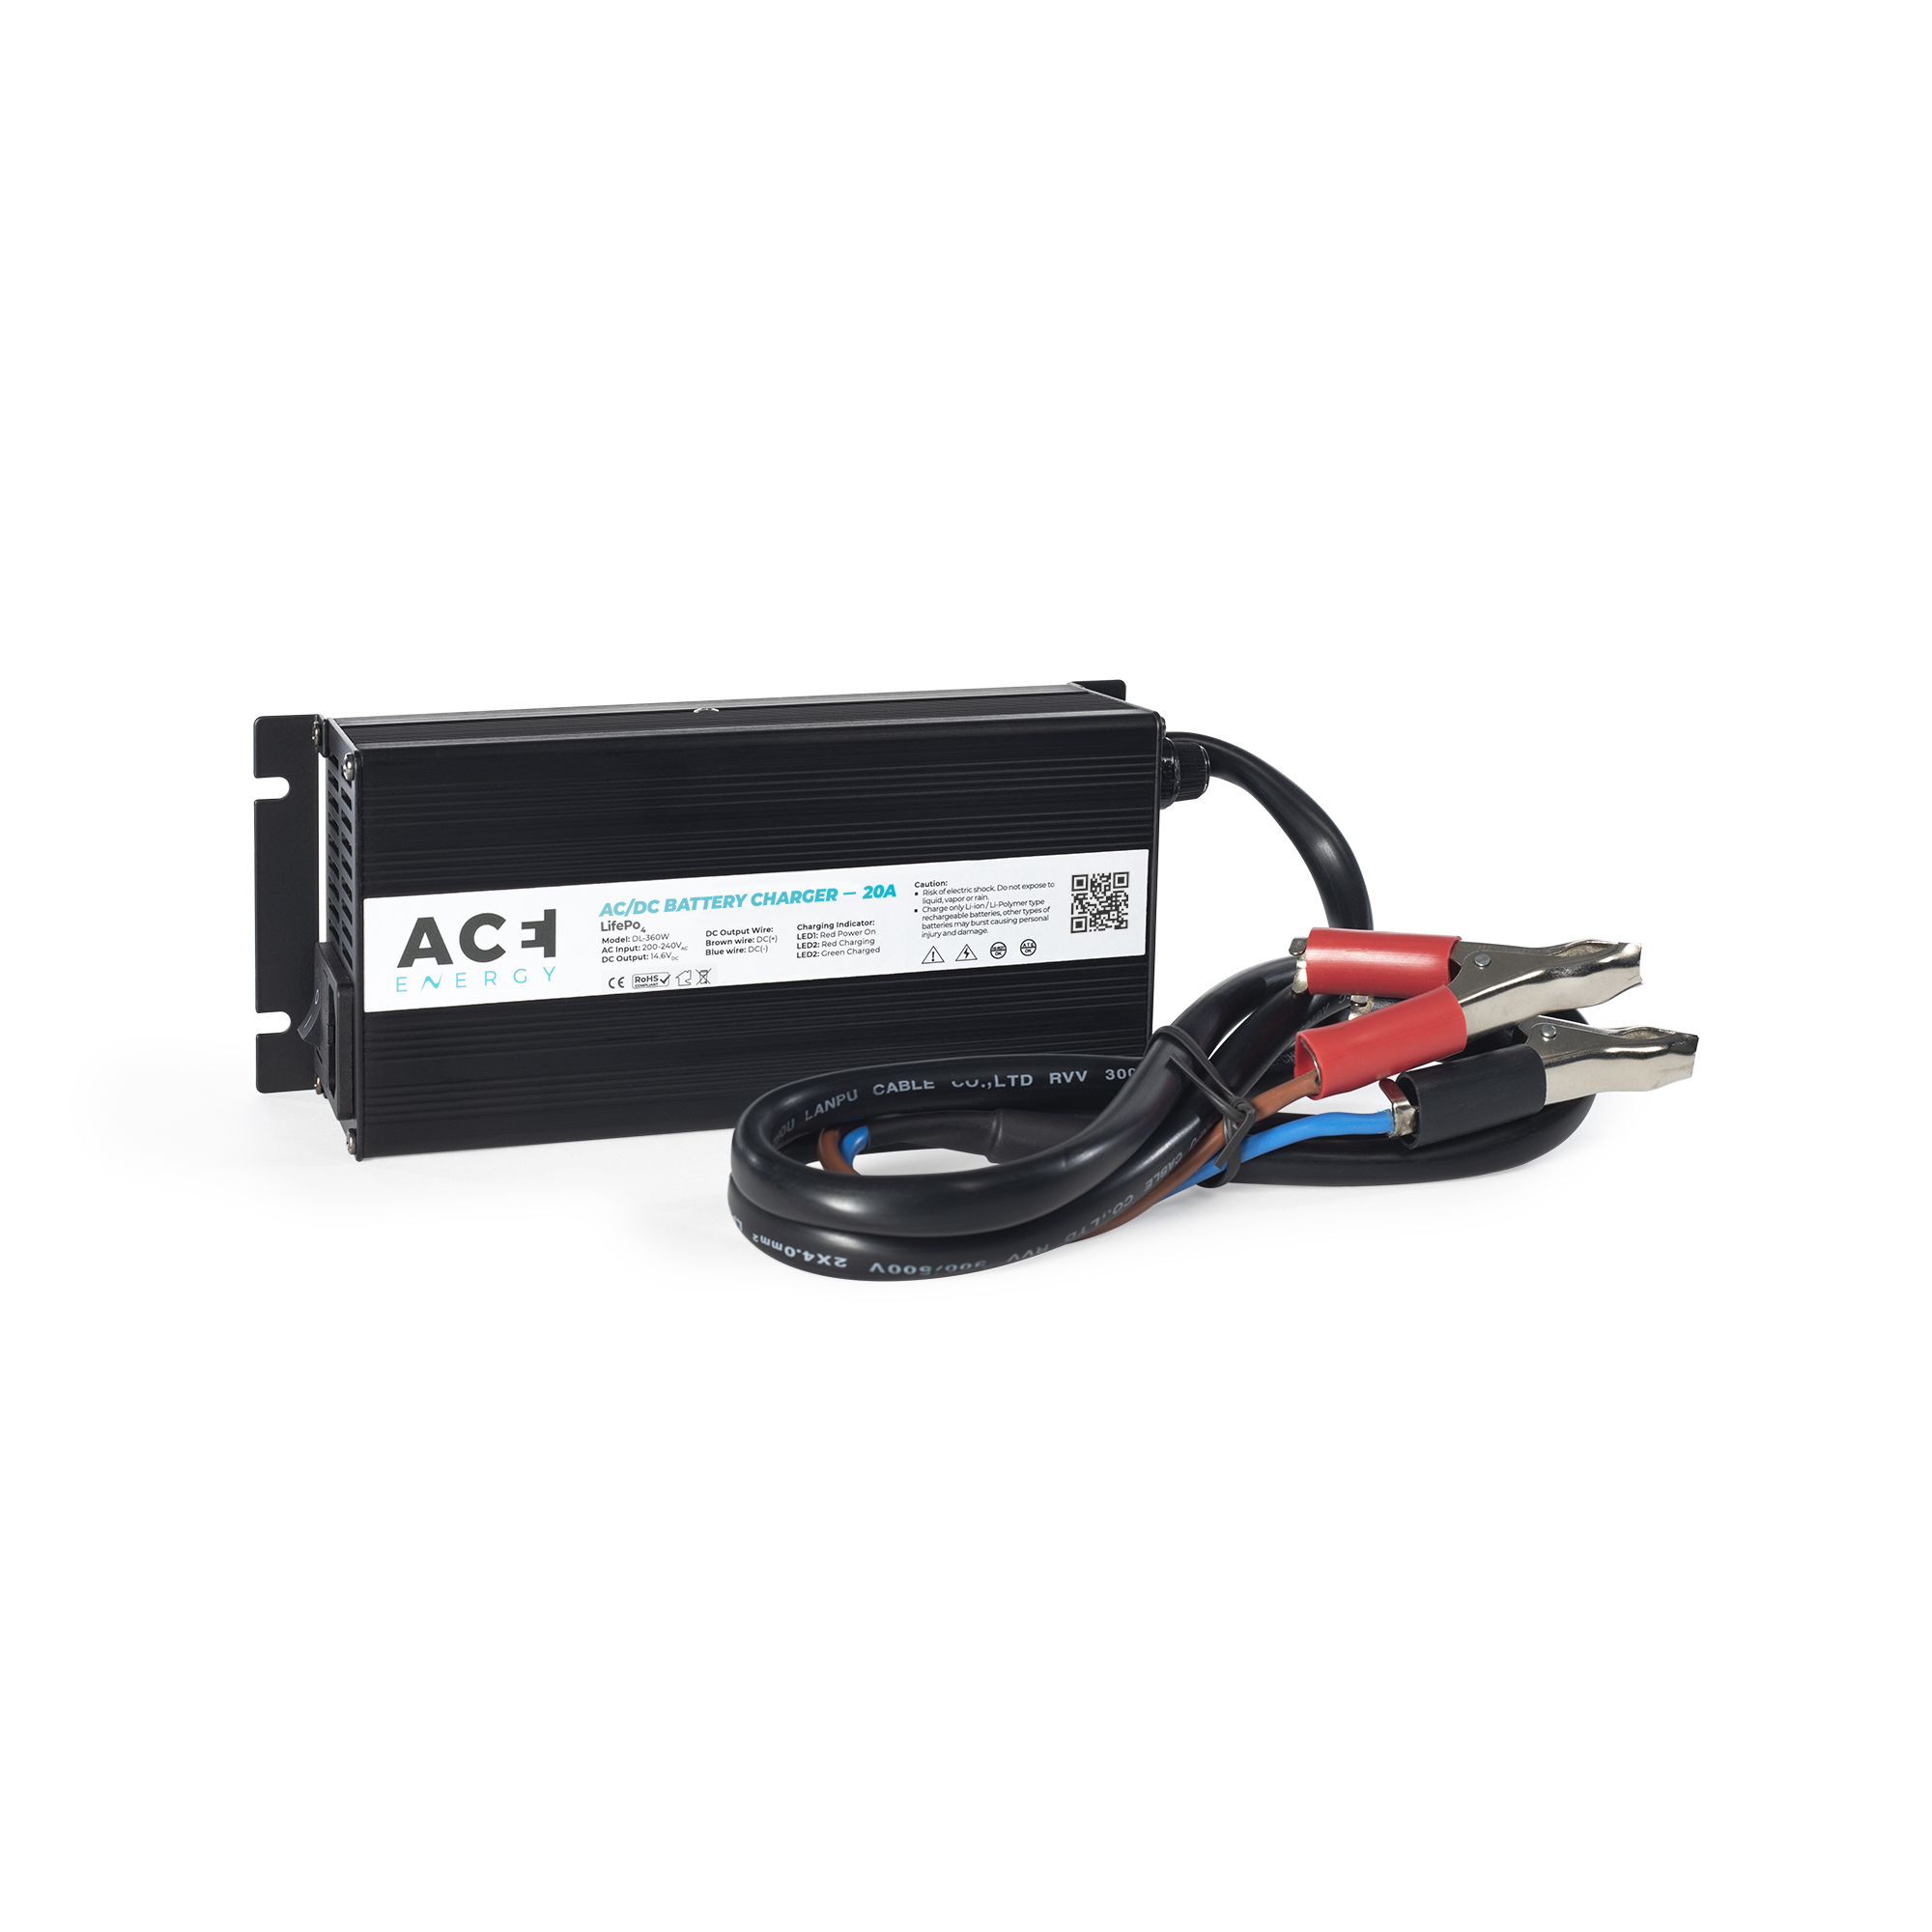 https://www.ace-energy.fr/wp-content/uploads/2020/03/ACE-CHARGEUR-ACDC-20A-02-WEB.jpg